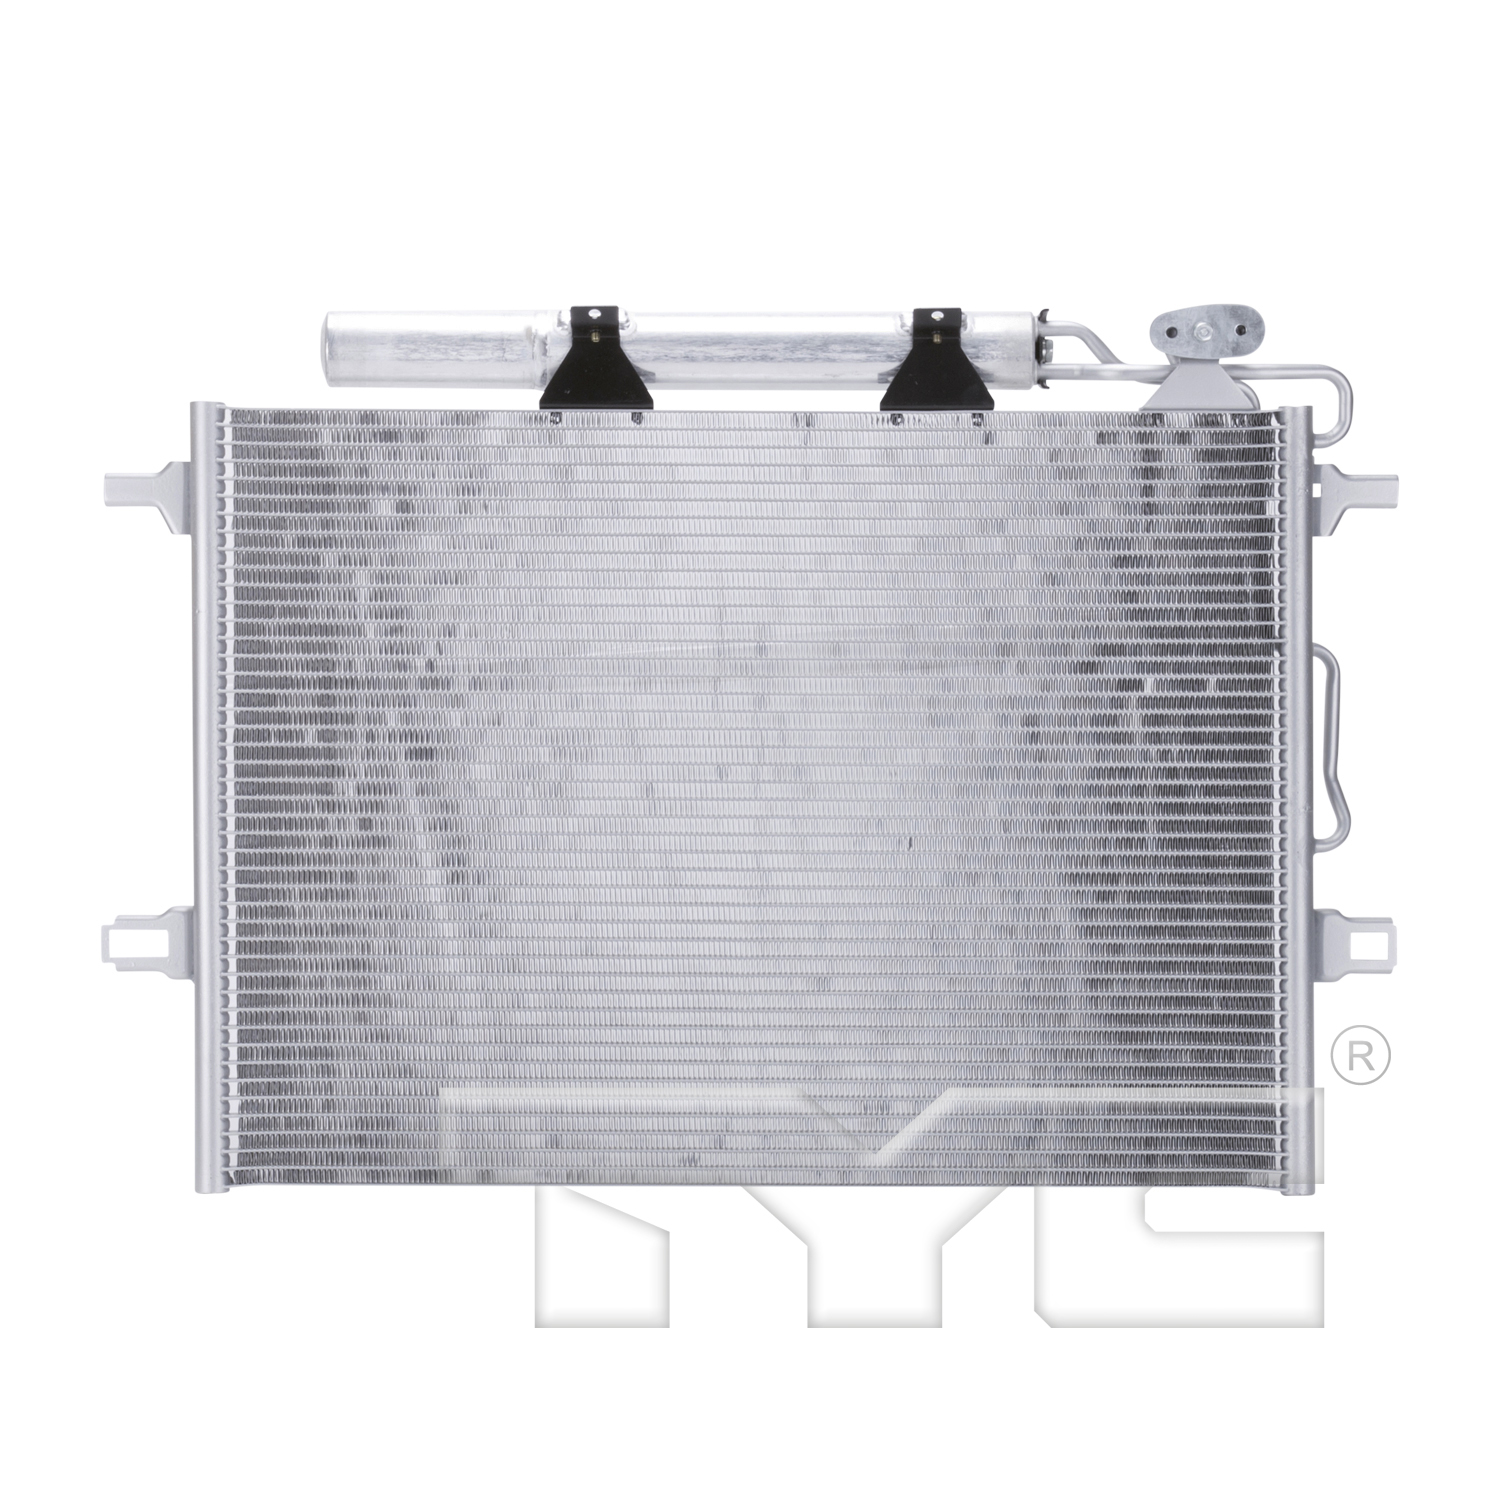 Aftermarket AC CONDENSERS for MERCEDES-BENZ - E55 AMG, E55 AMG,03-06,Air conditioning condenser